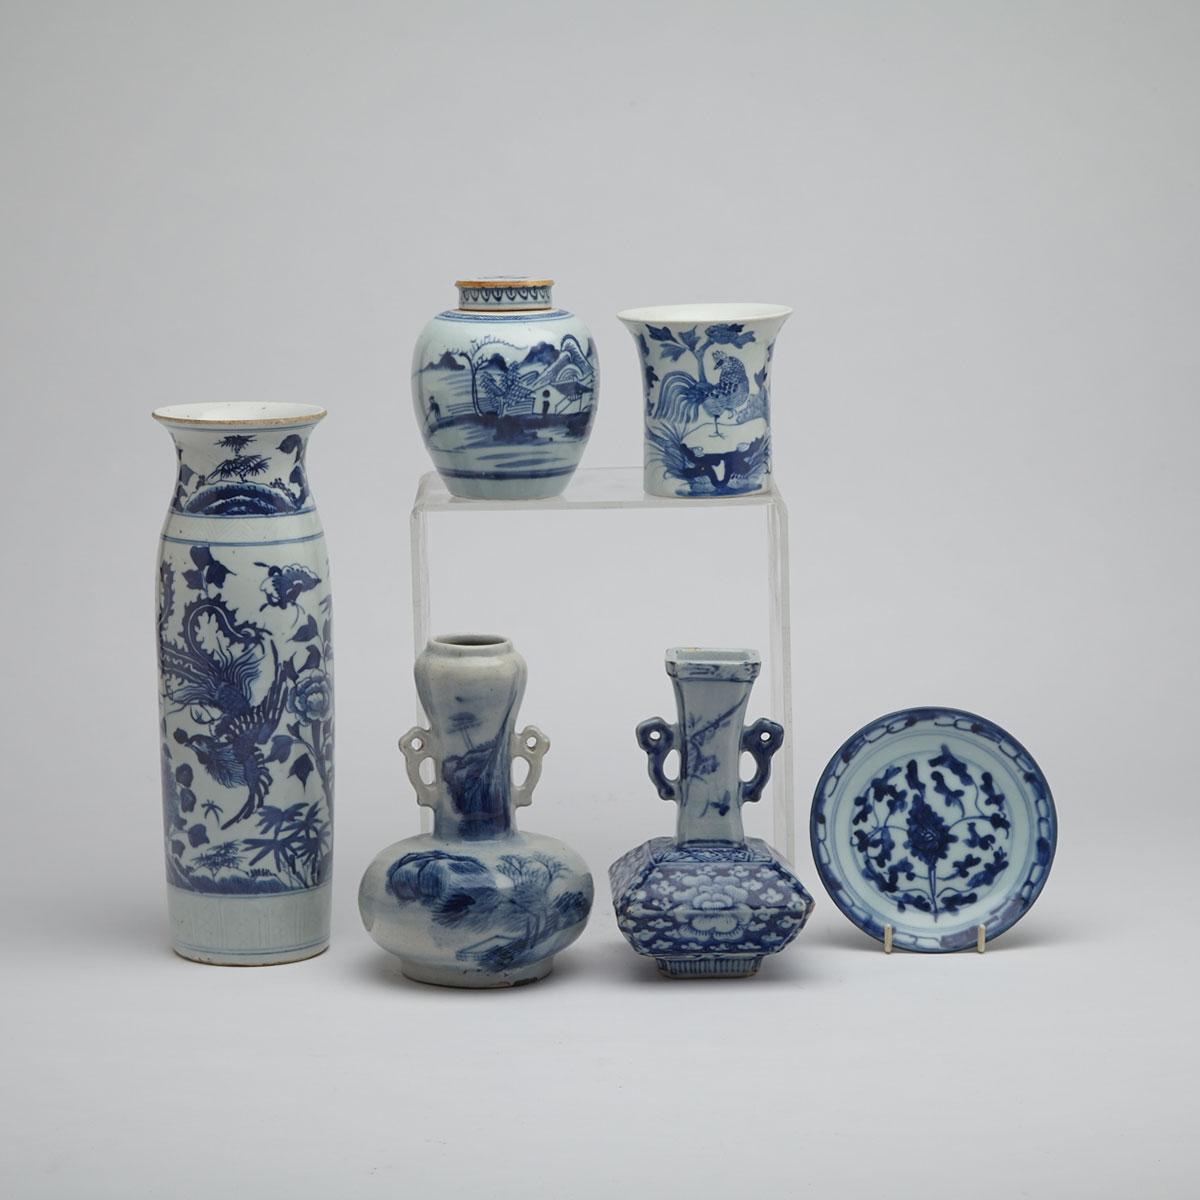 Six Blue and White Porcelain Wares, 17th Century to Early 20th Century